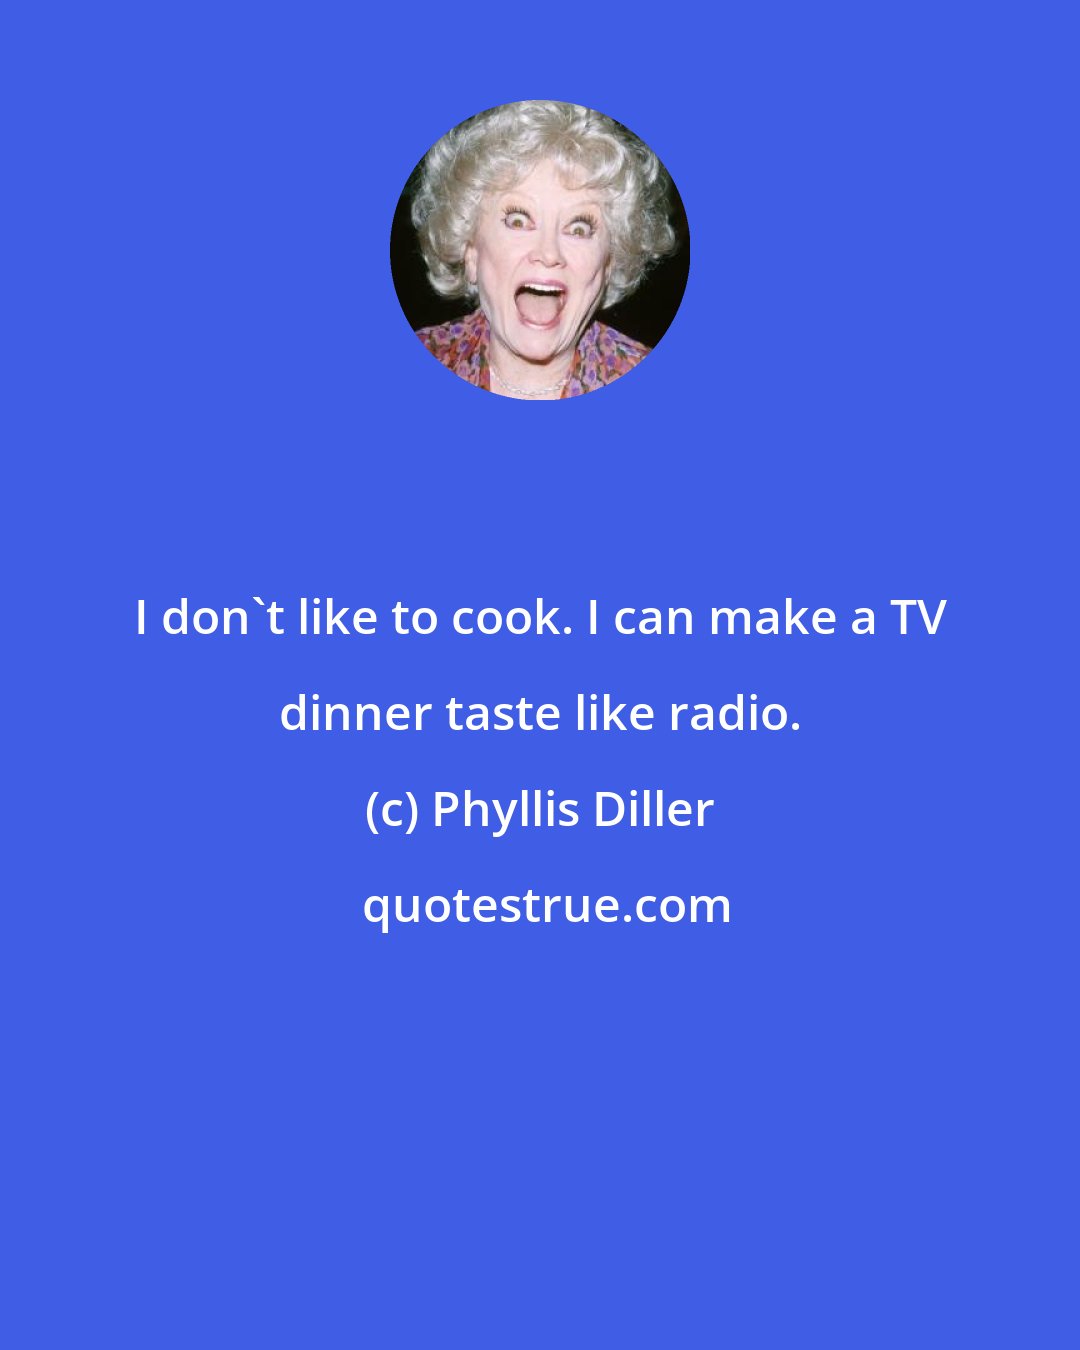 Phyllis Diller: I don't like to cook. I can make a TV dinner taste like radio.